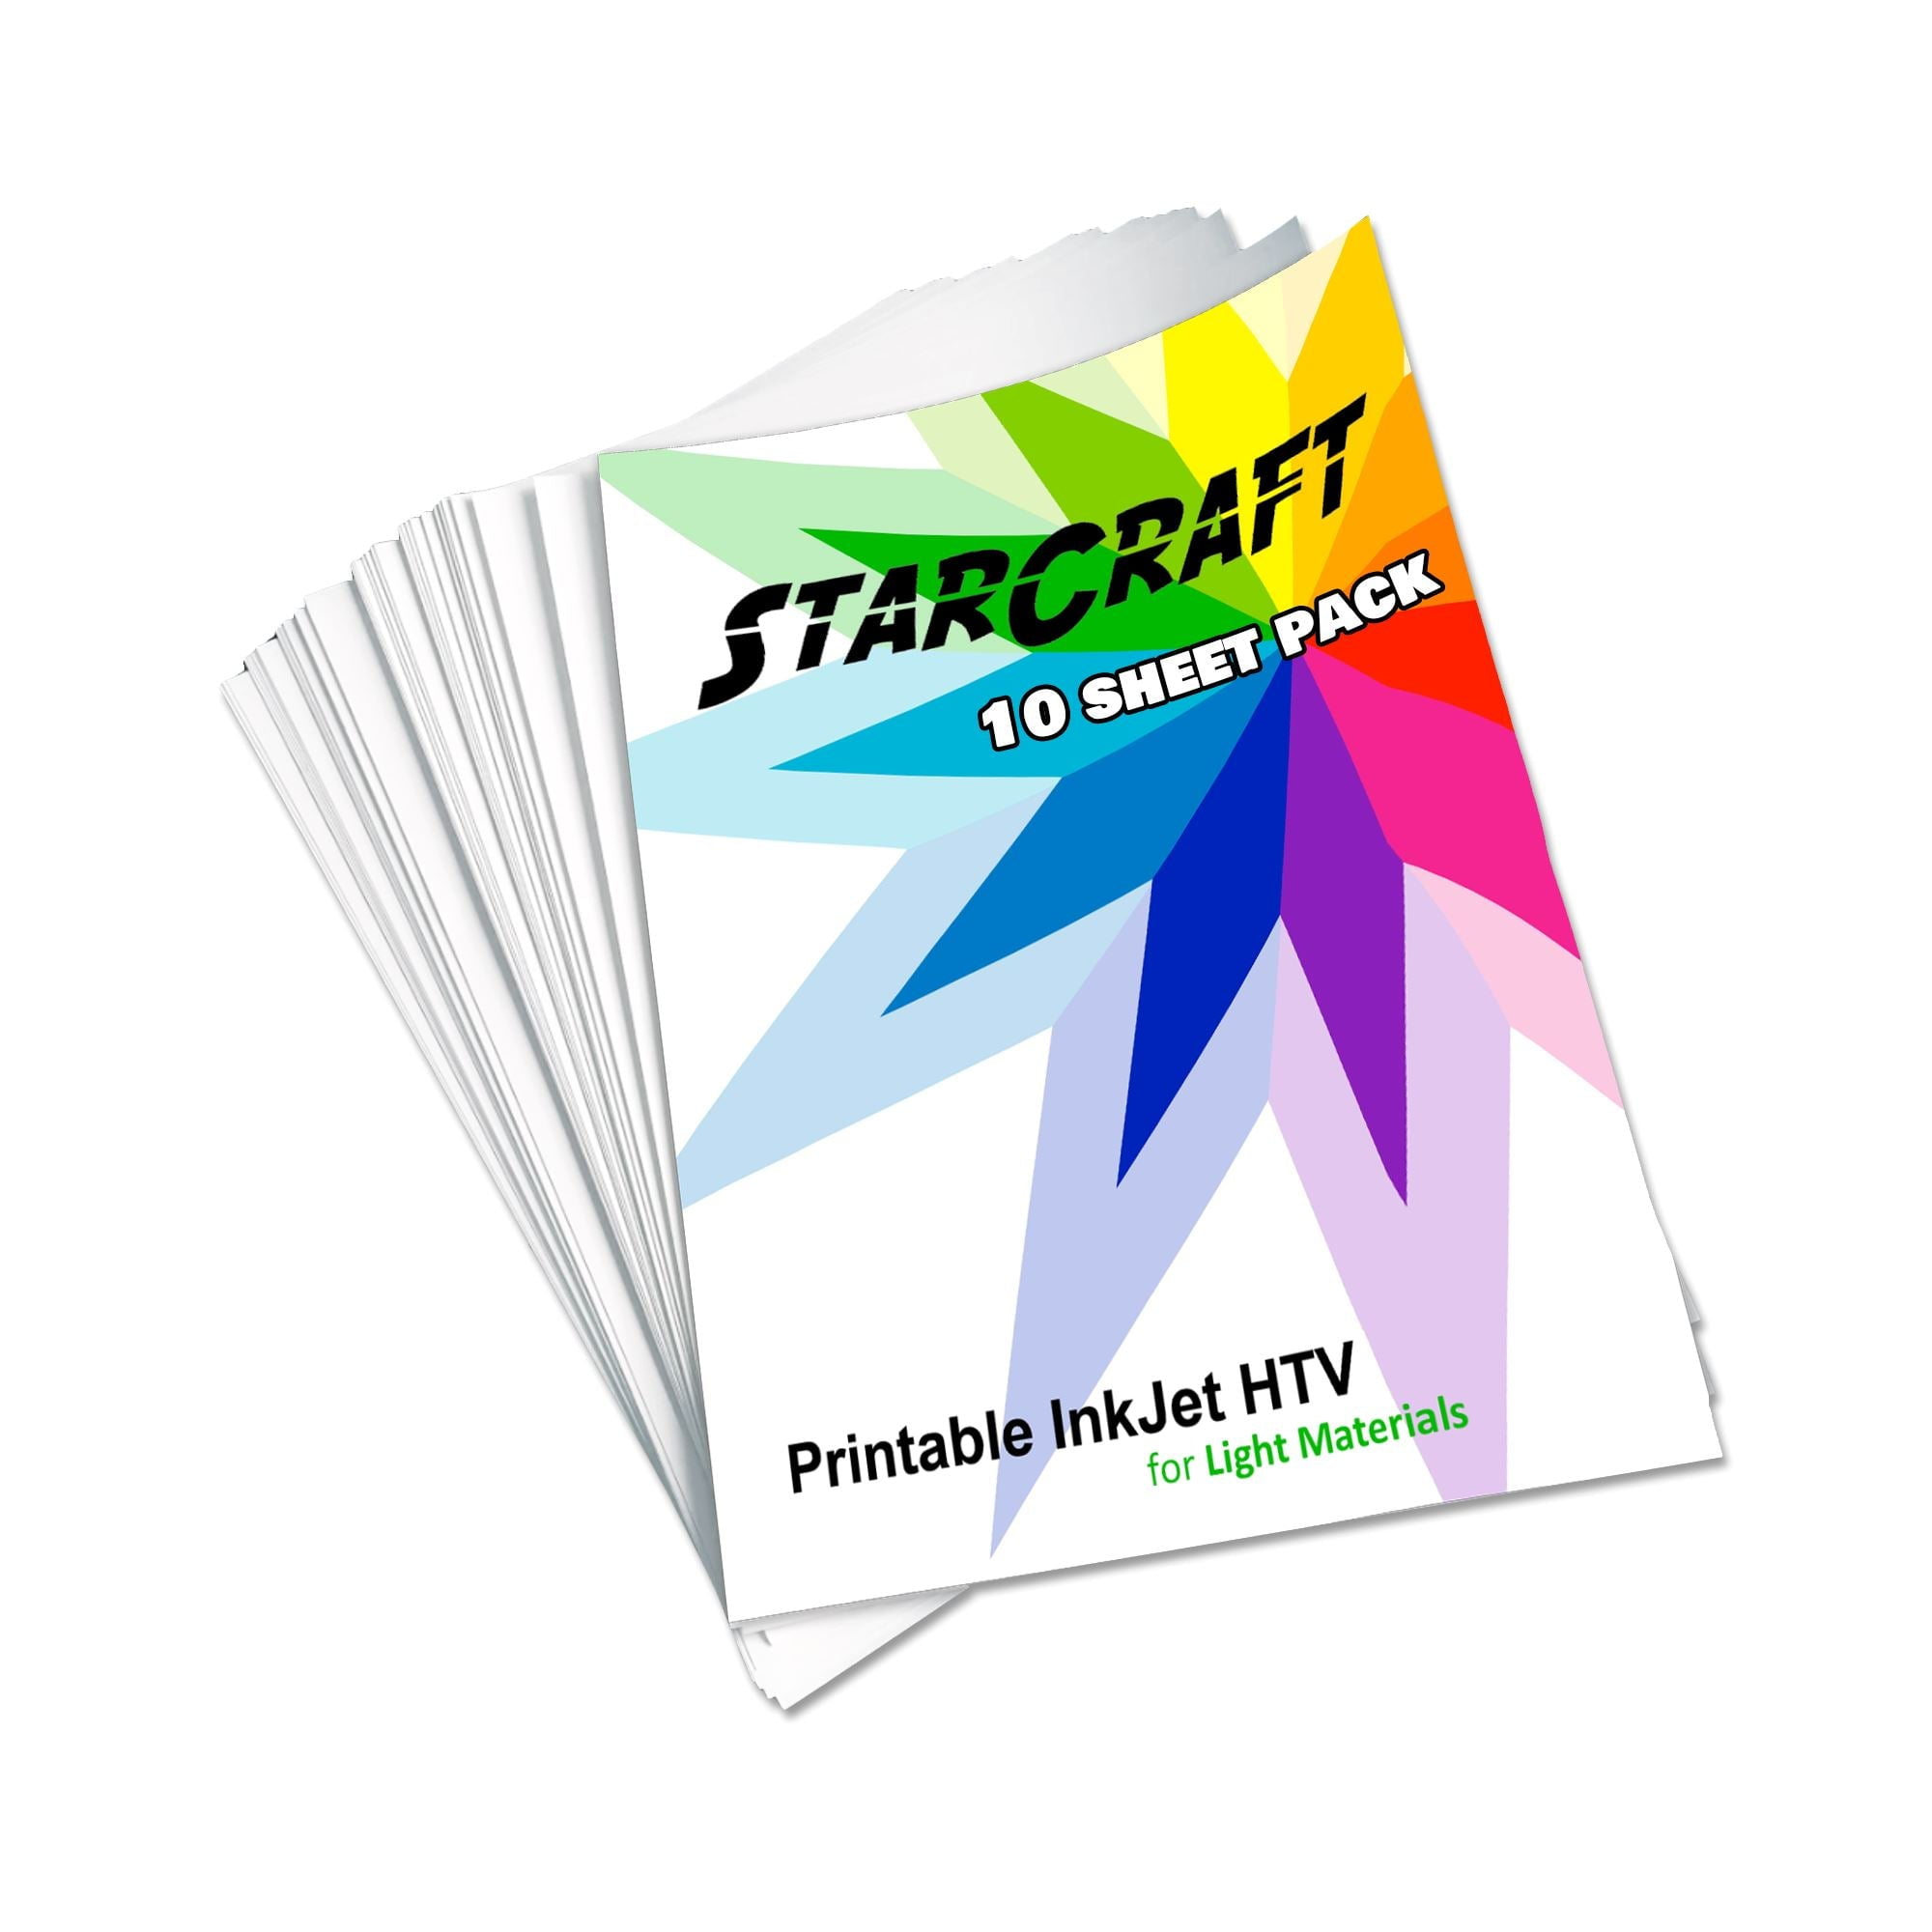 How to Use Starcraft Inkjet Printable Heat Transfer (HTV) for